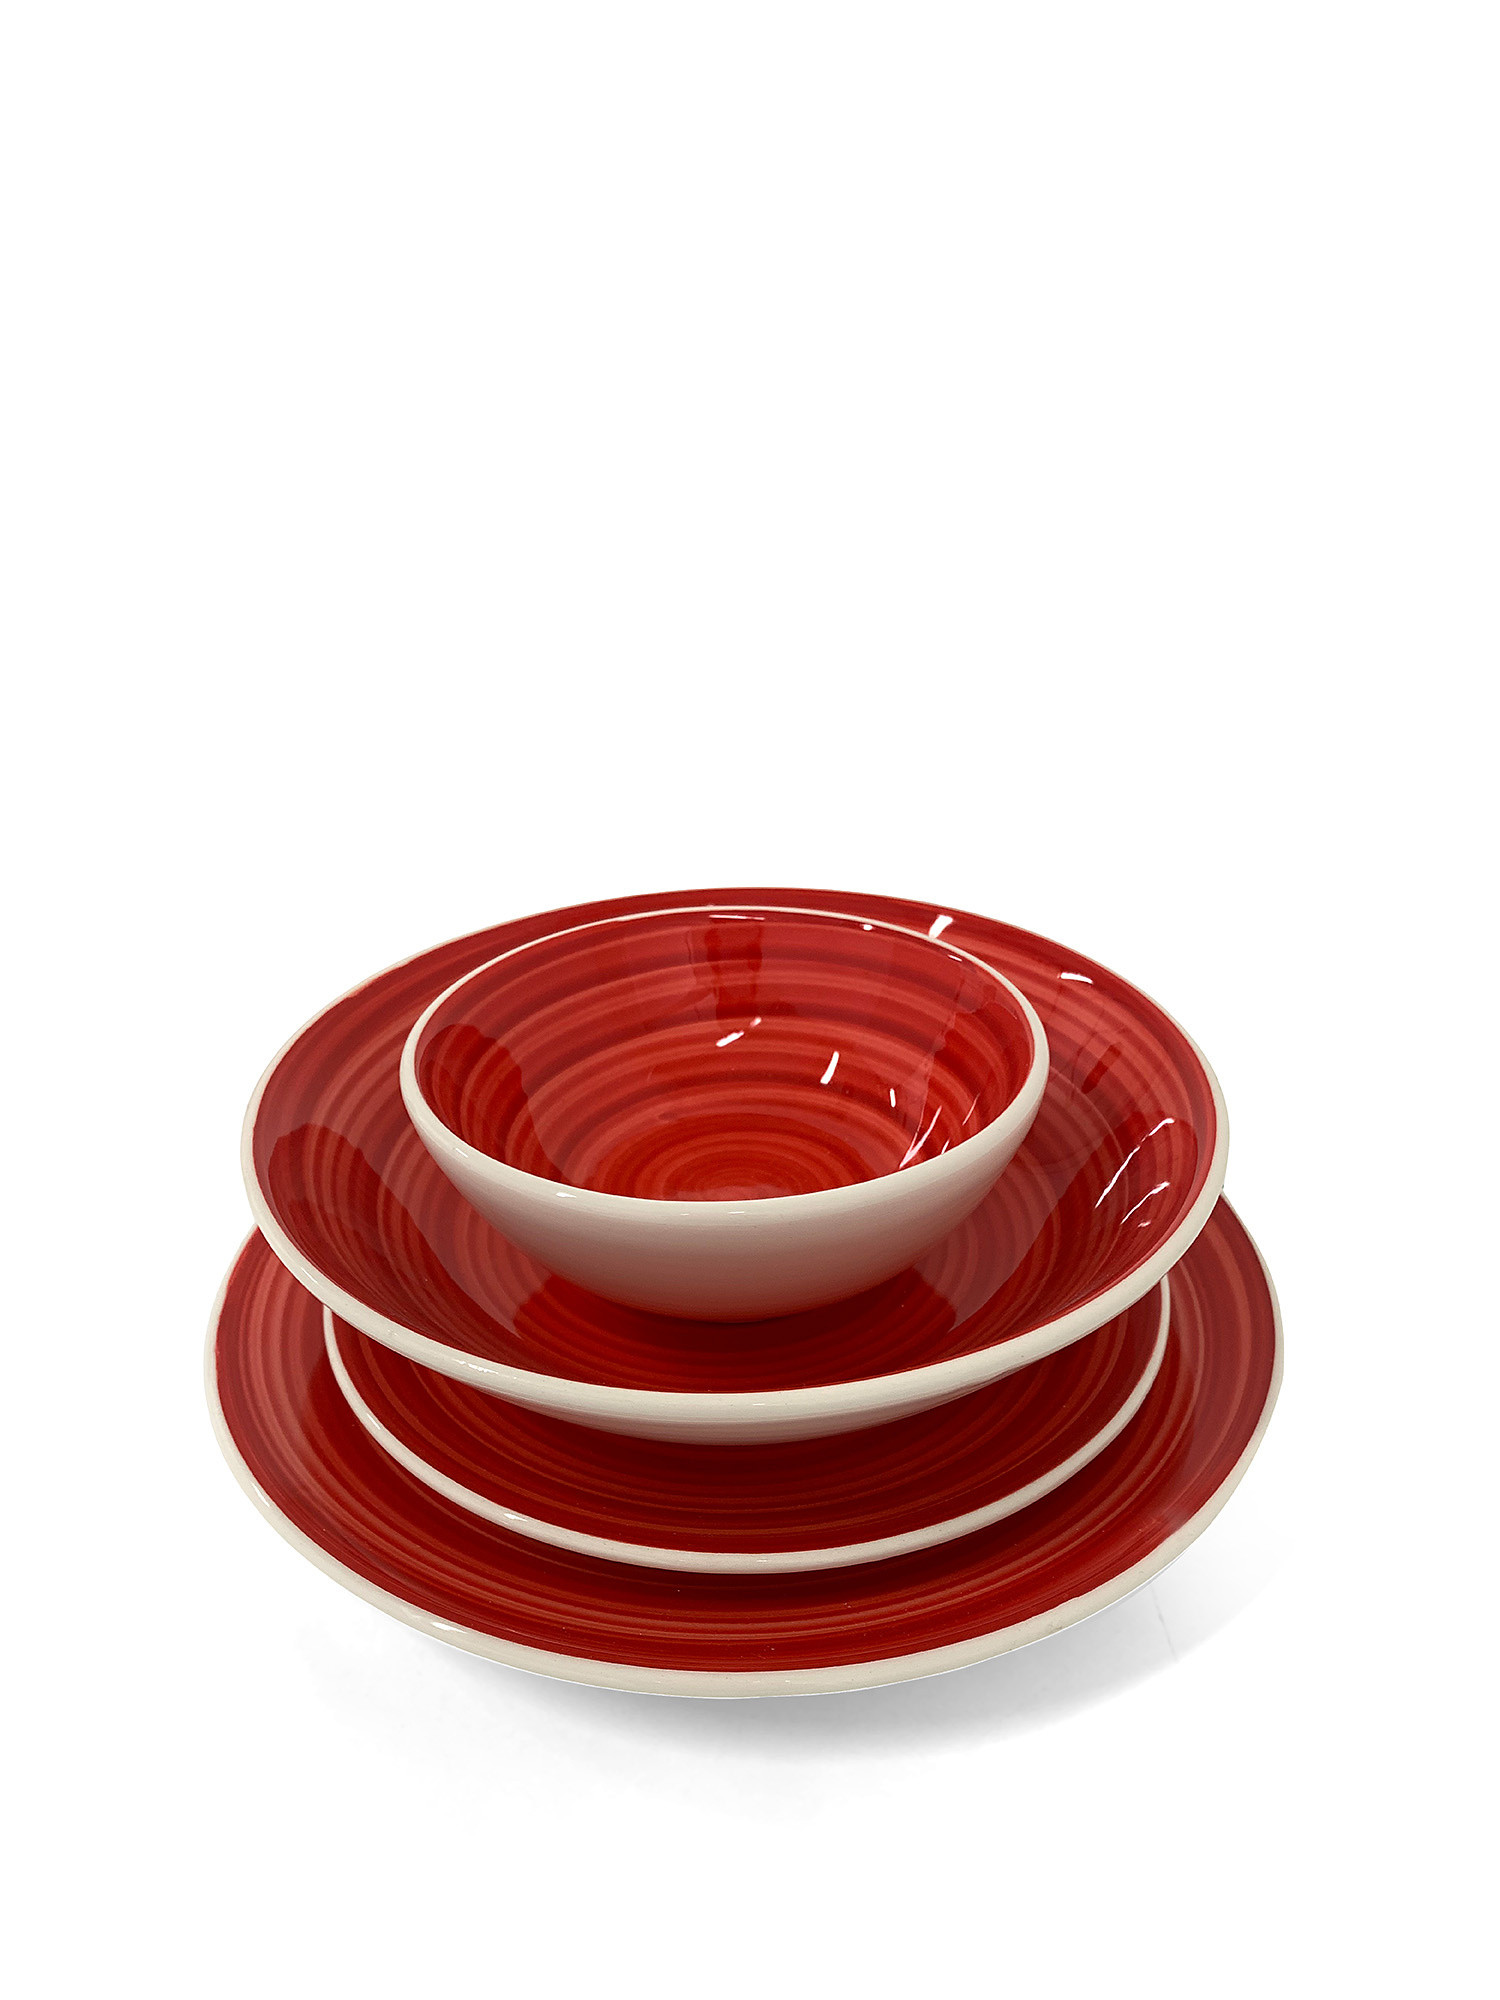 Coppetta ceramica dipinta a mano Spirale, Rosso, large image number 1